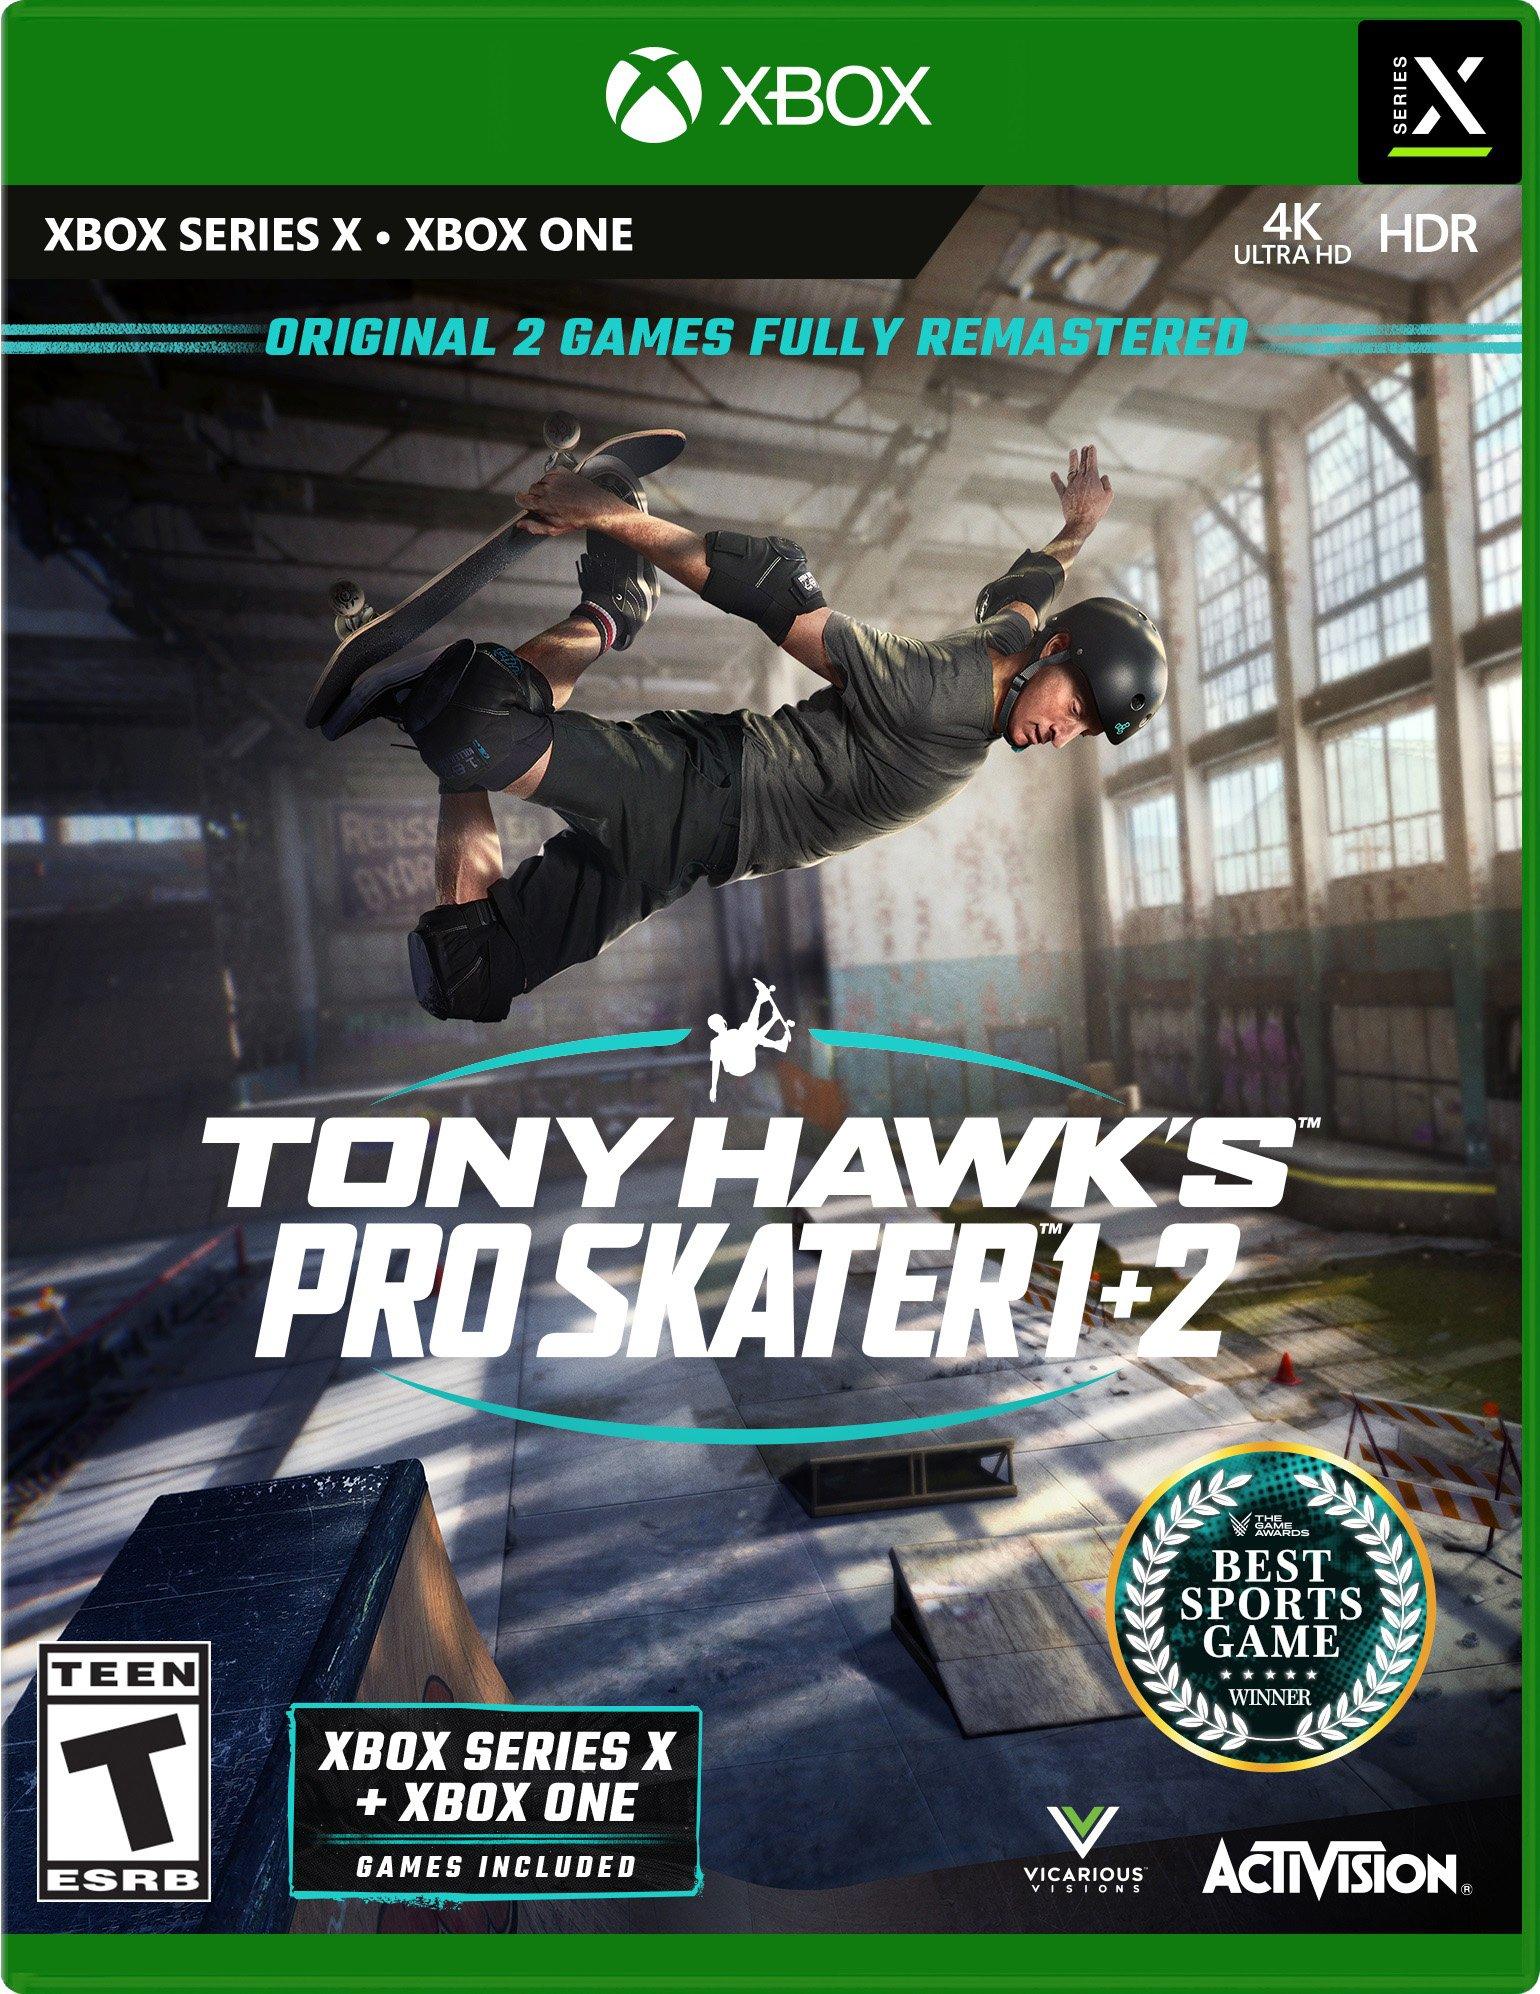 Tony Hawk's Pro Skater 3 - Xbox Series S - XBSX2 Frame Rate Test 